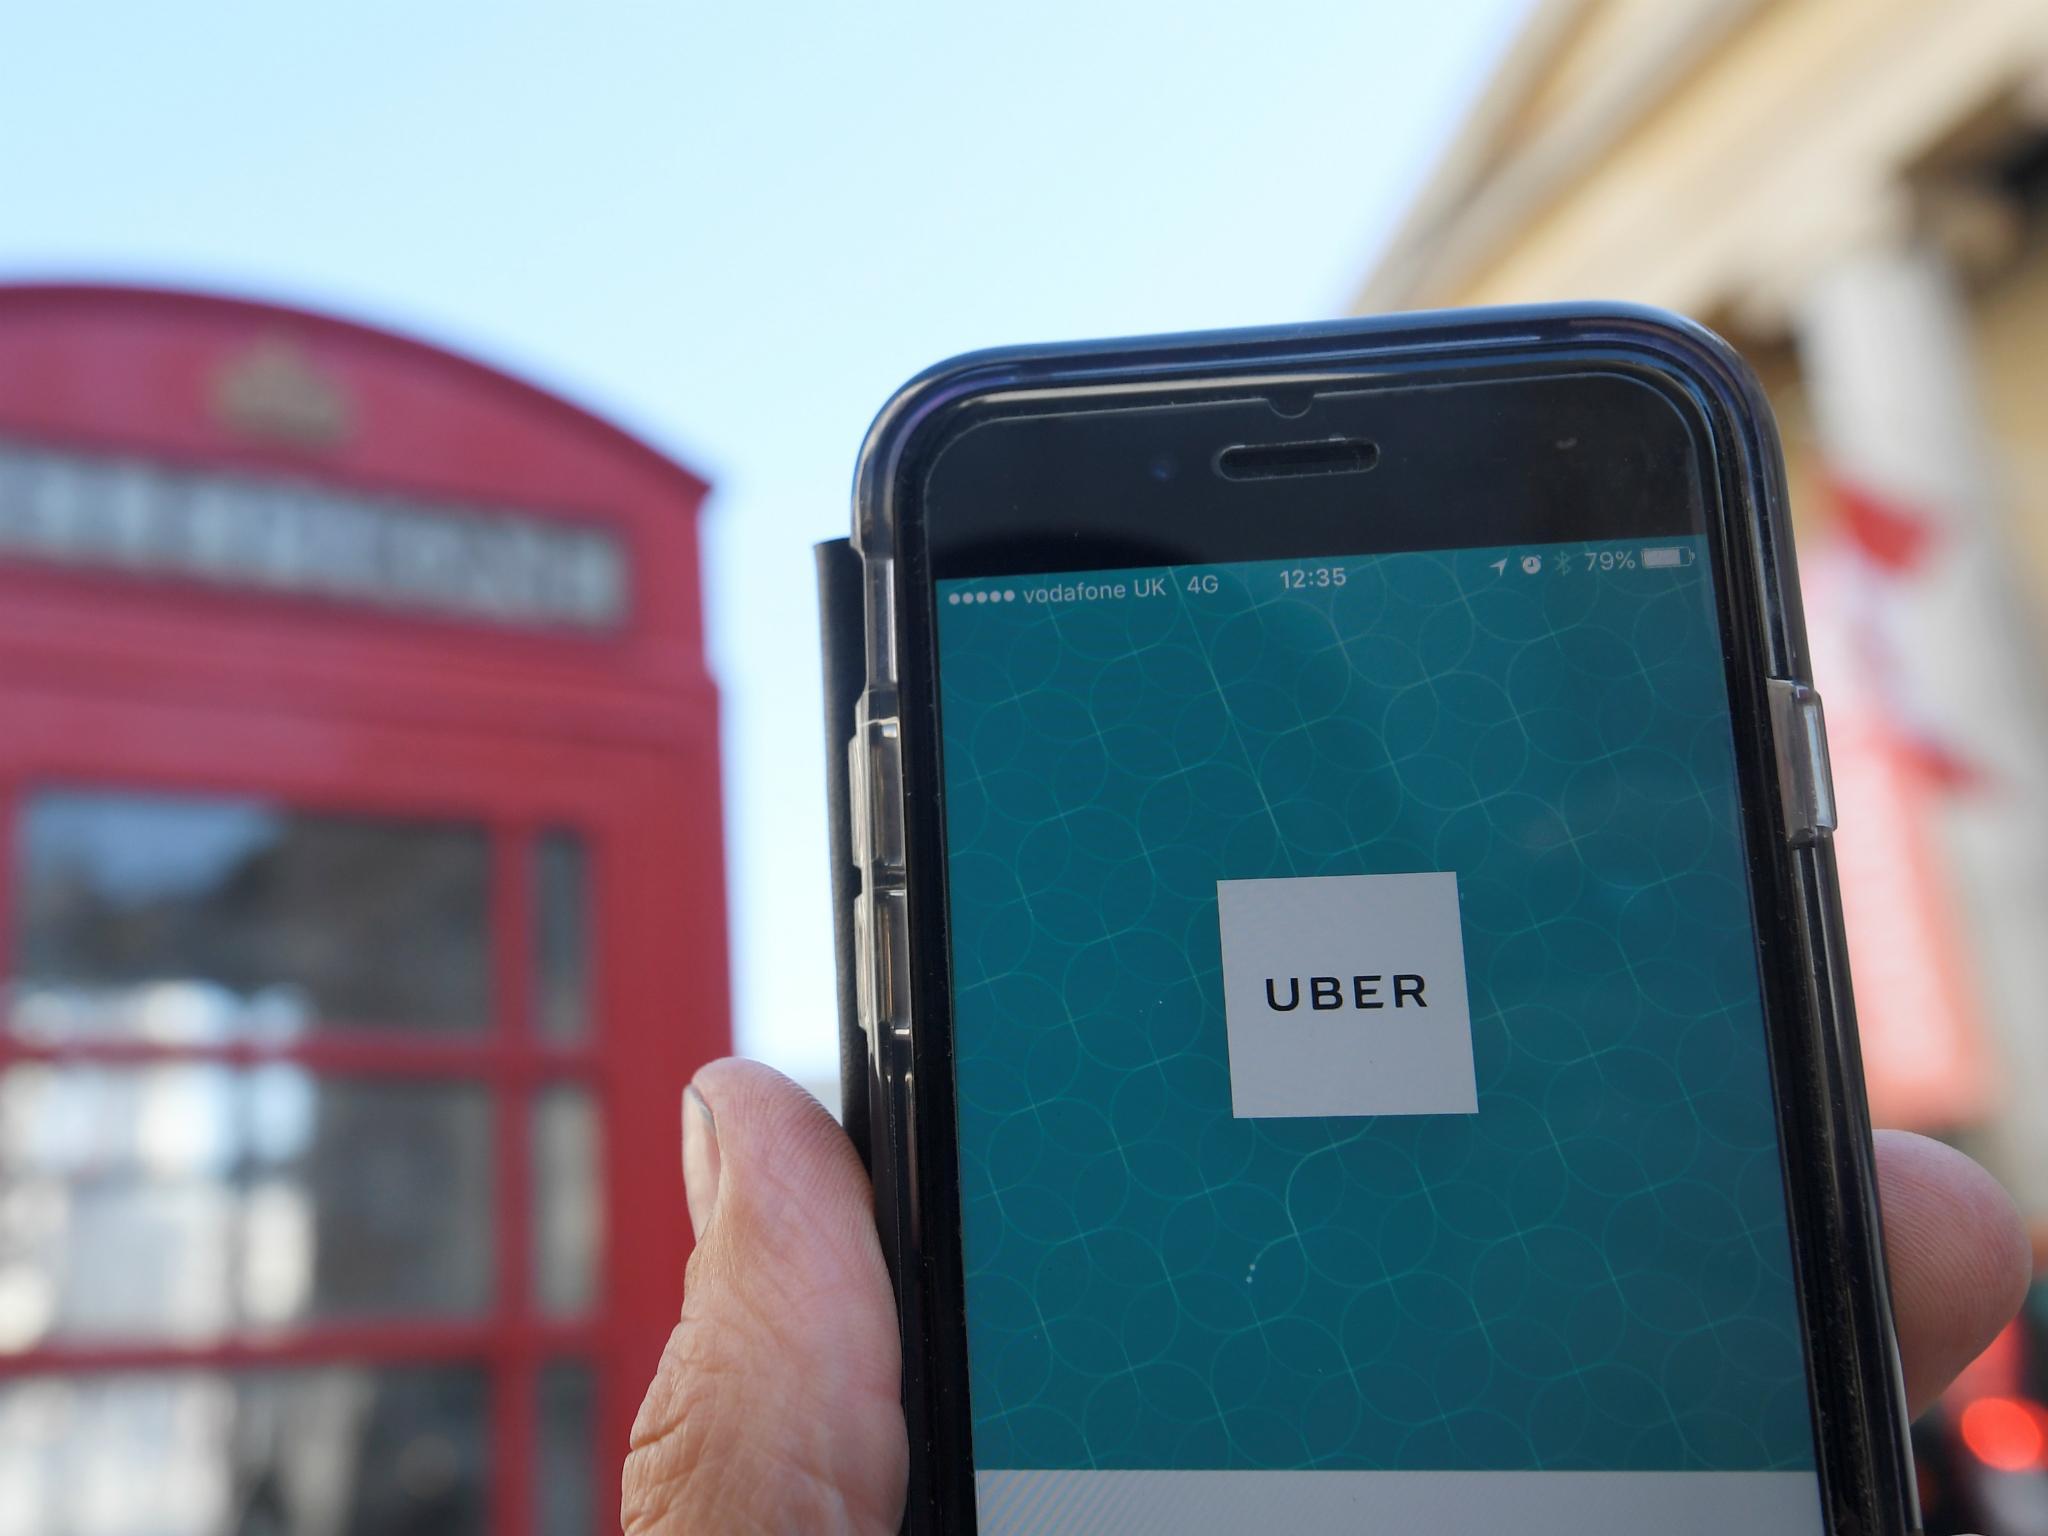 Uber has been stripped of its London licence, but plans to appeal and can continue to operate as normal